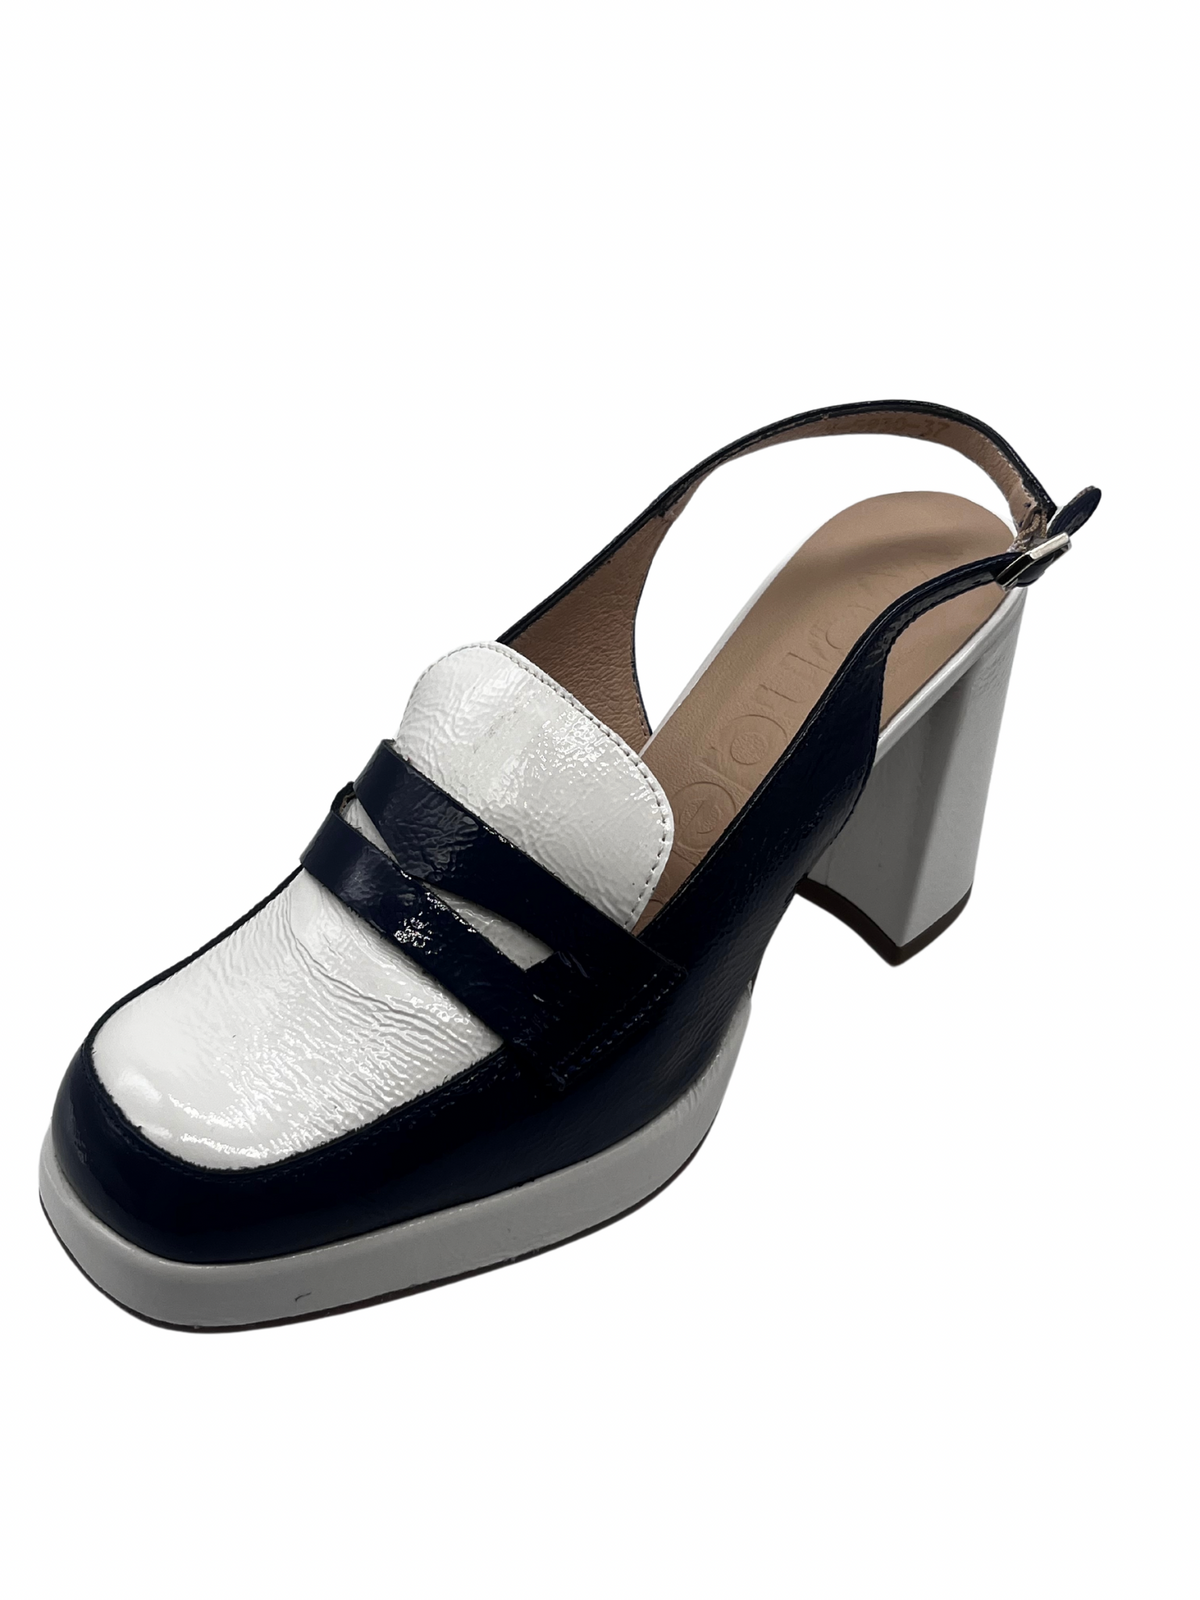 Wonders Navy And White Leather Heels